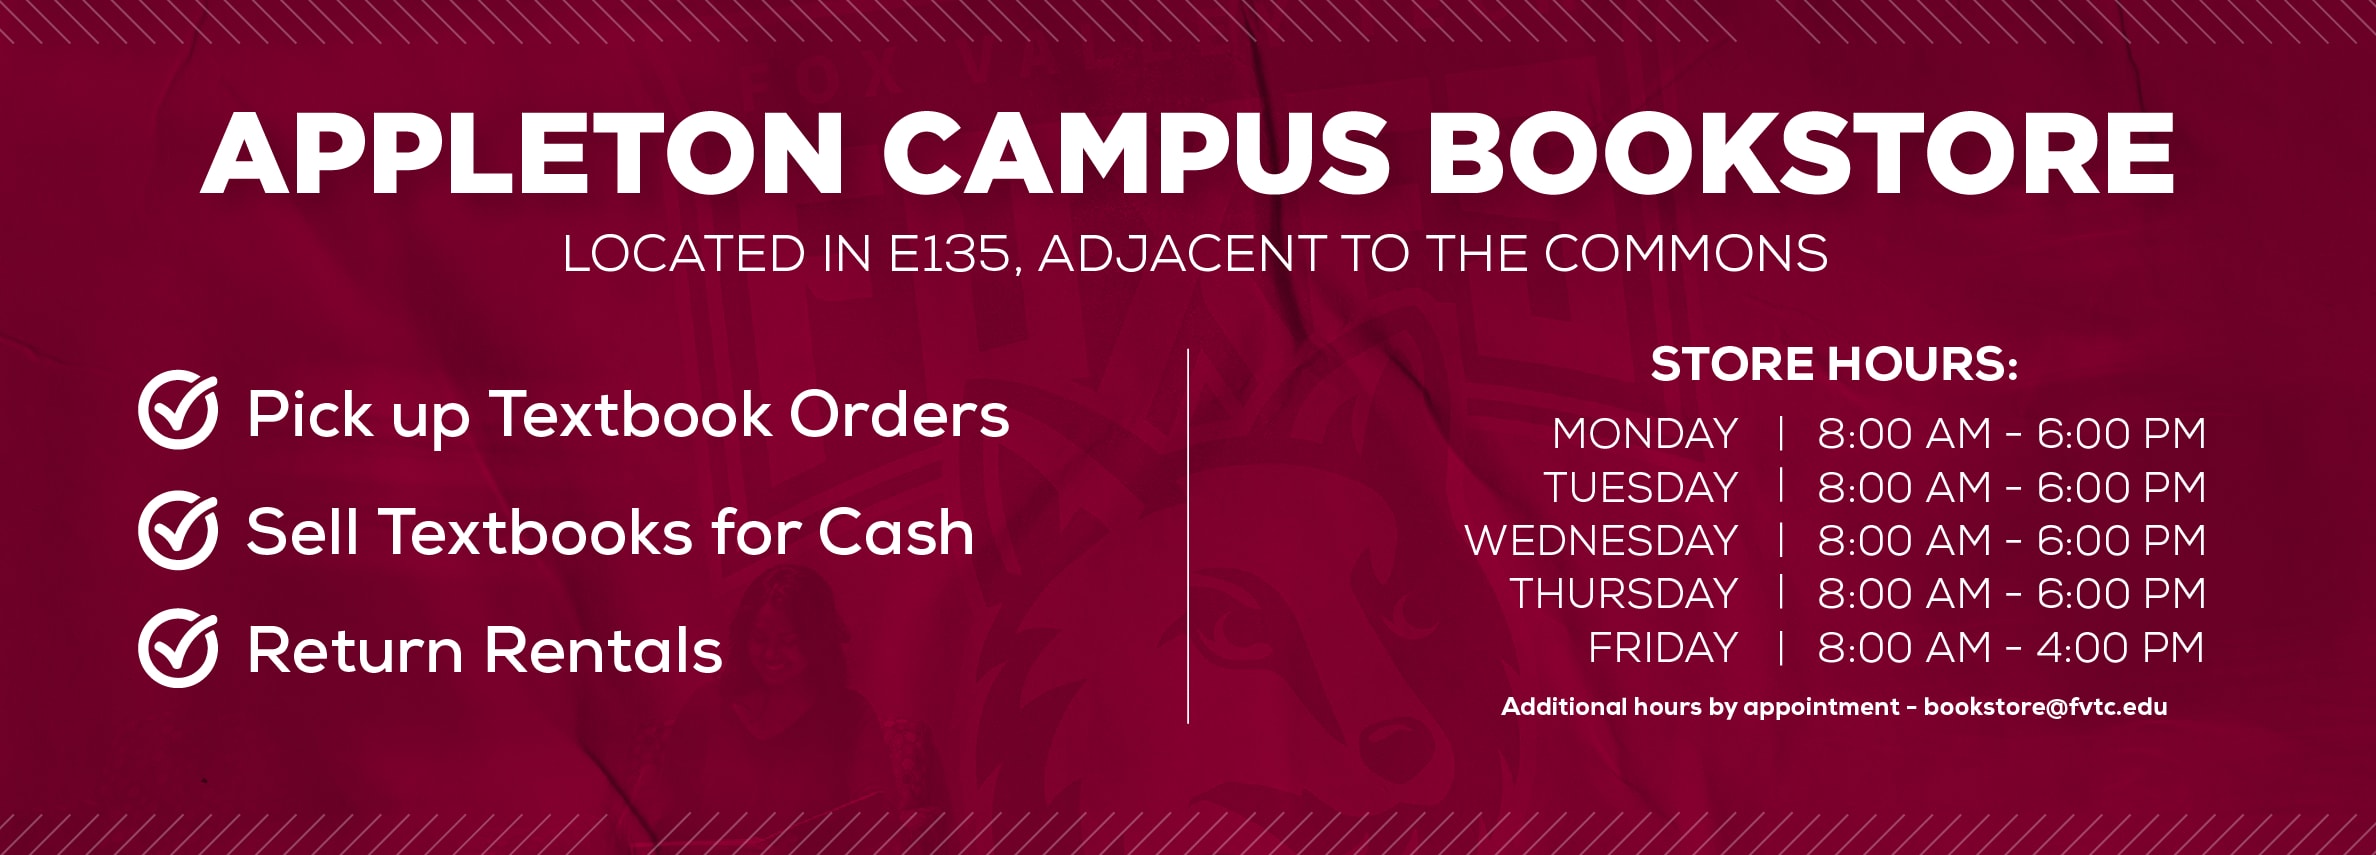 Appleton Campus Bookstore Hours. Located in E135, adjacent to the Commons. Monday: 8AM - 6PM Tuesday: 8AM - 6PM Wednesday: 8AM - 6PM Thursday: 8AM - 6PM Friday: 8AM - 4PM